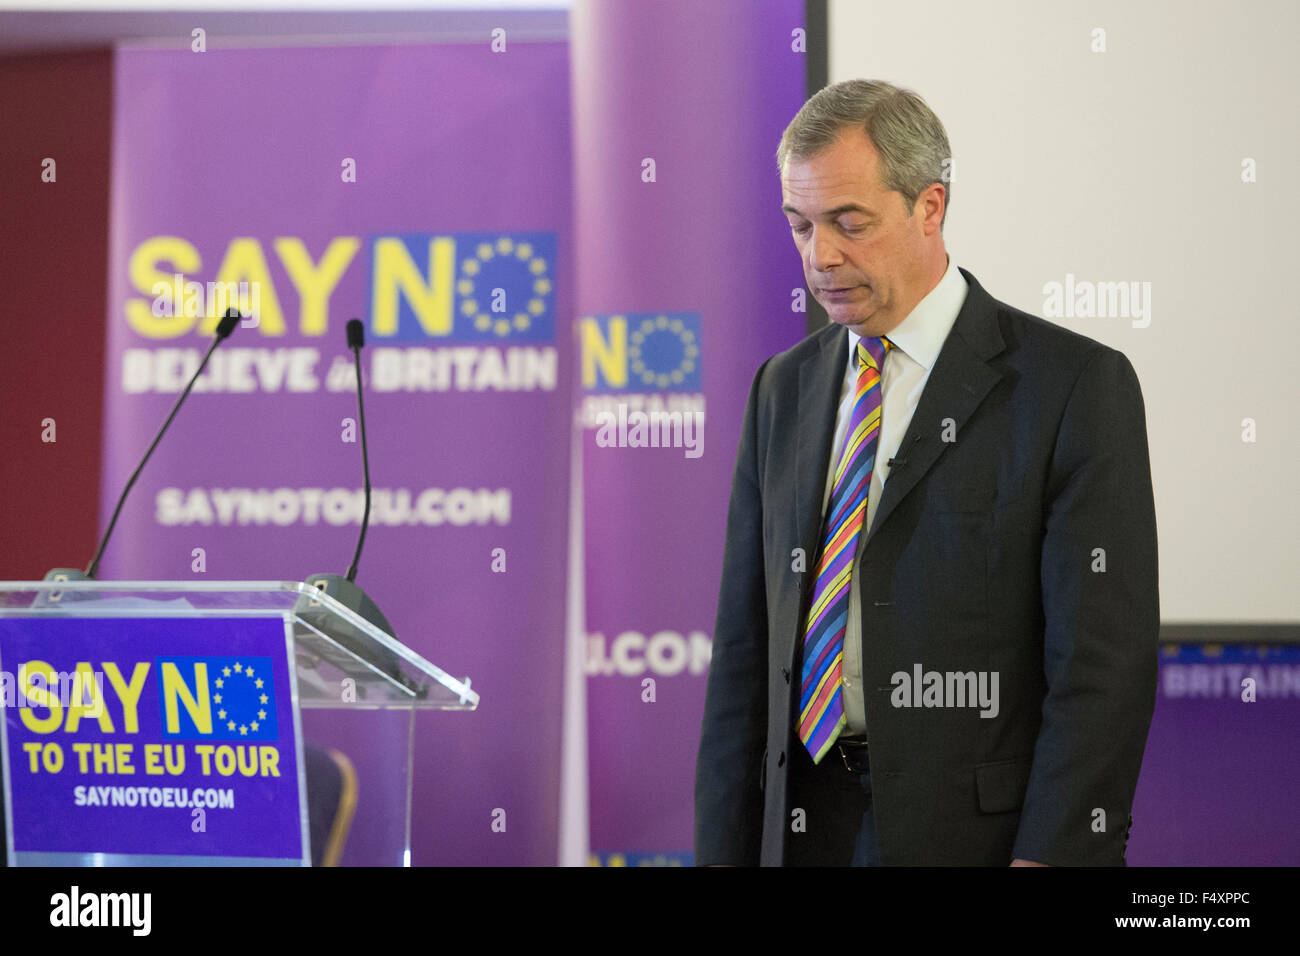 UK Independence Party (UKIP) leader Nigel Farage a Swansea durante il 'say No per il tour dell'UE". Foto Stock